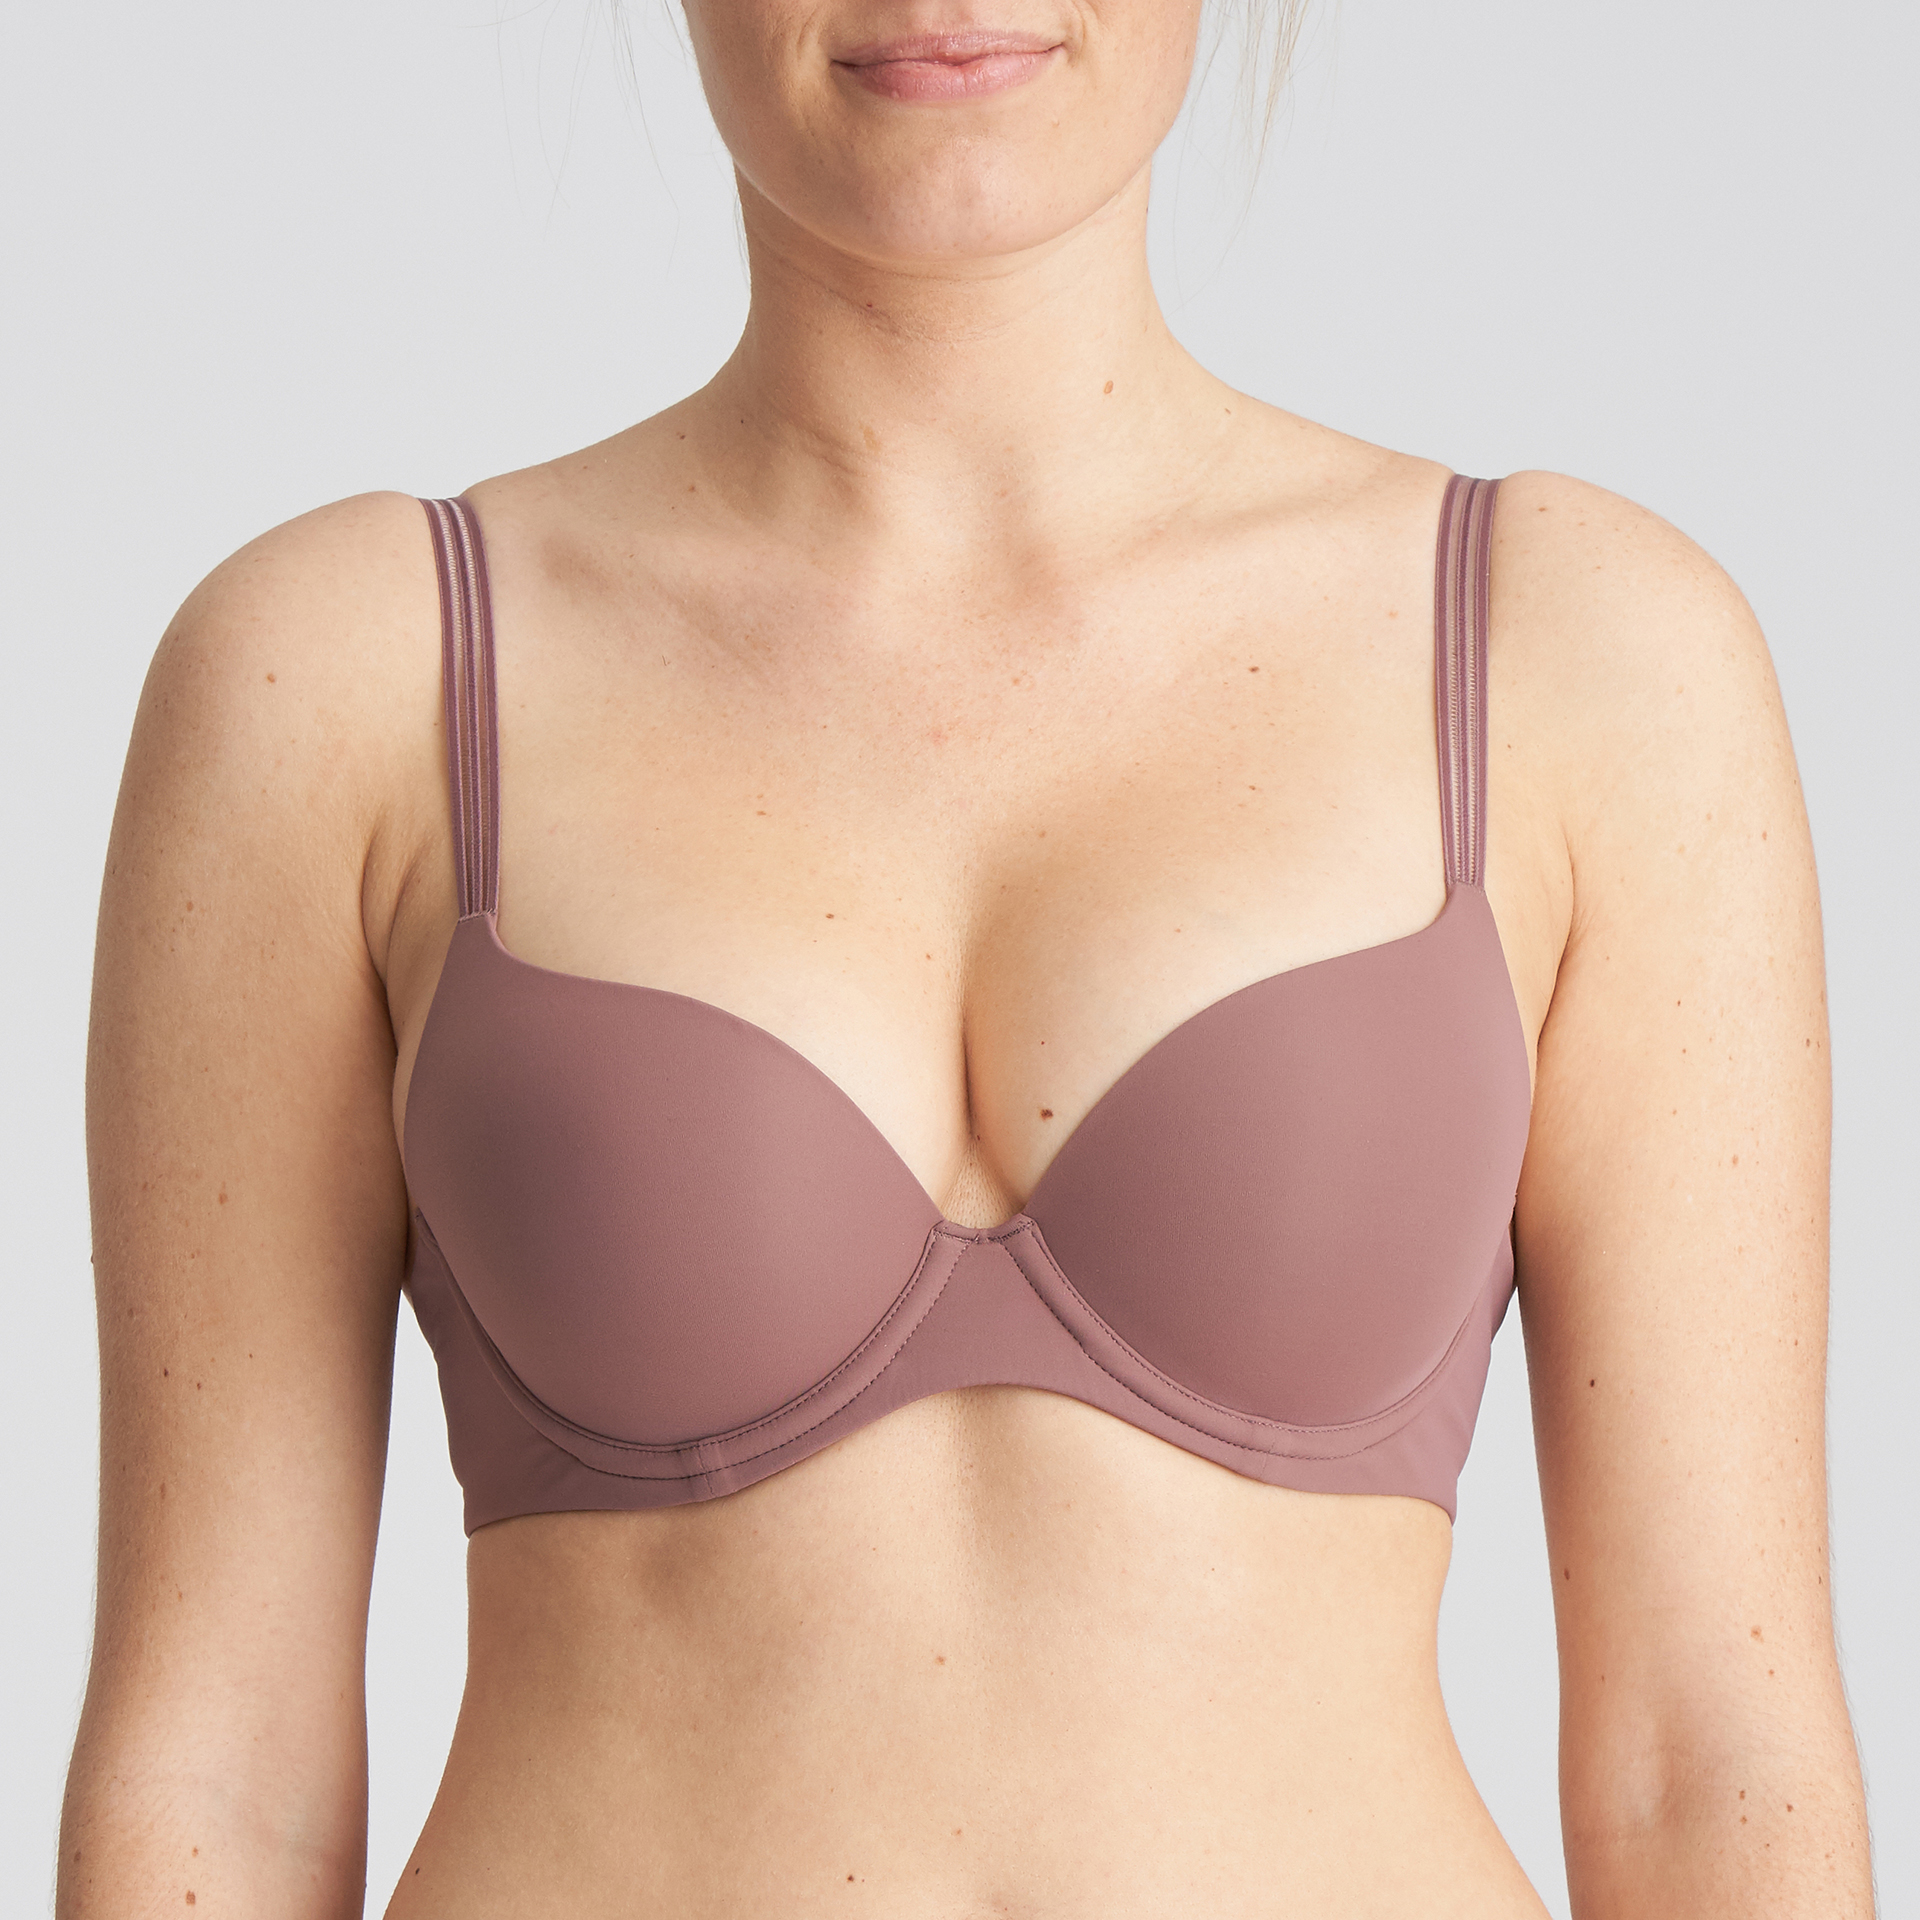 Padded bra without underwire satin tulle Poivre Glowy Story